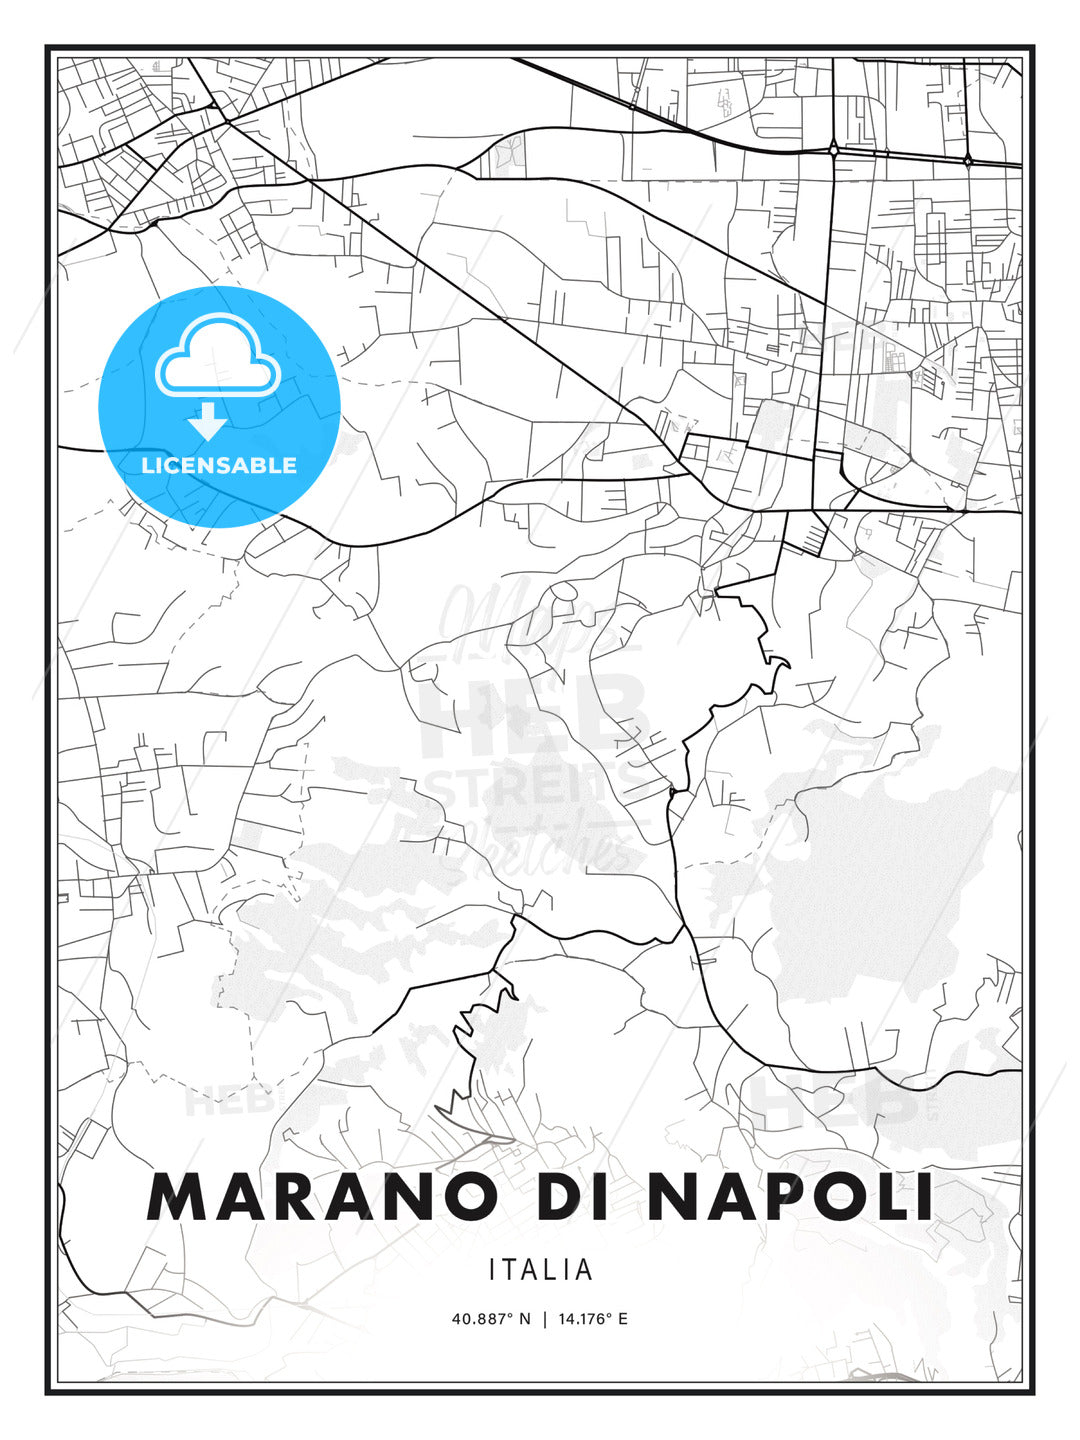 Marano di Napoli, Italy, Modern Print Template in Various Formats - HEBSTREITS Sketches